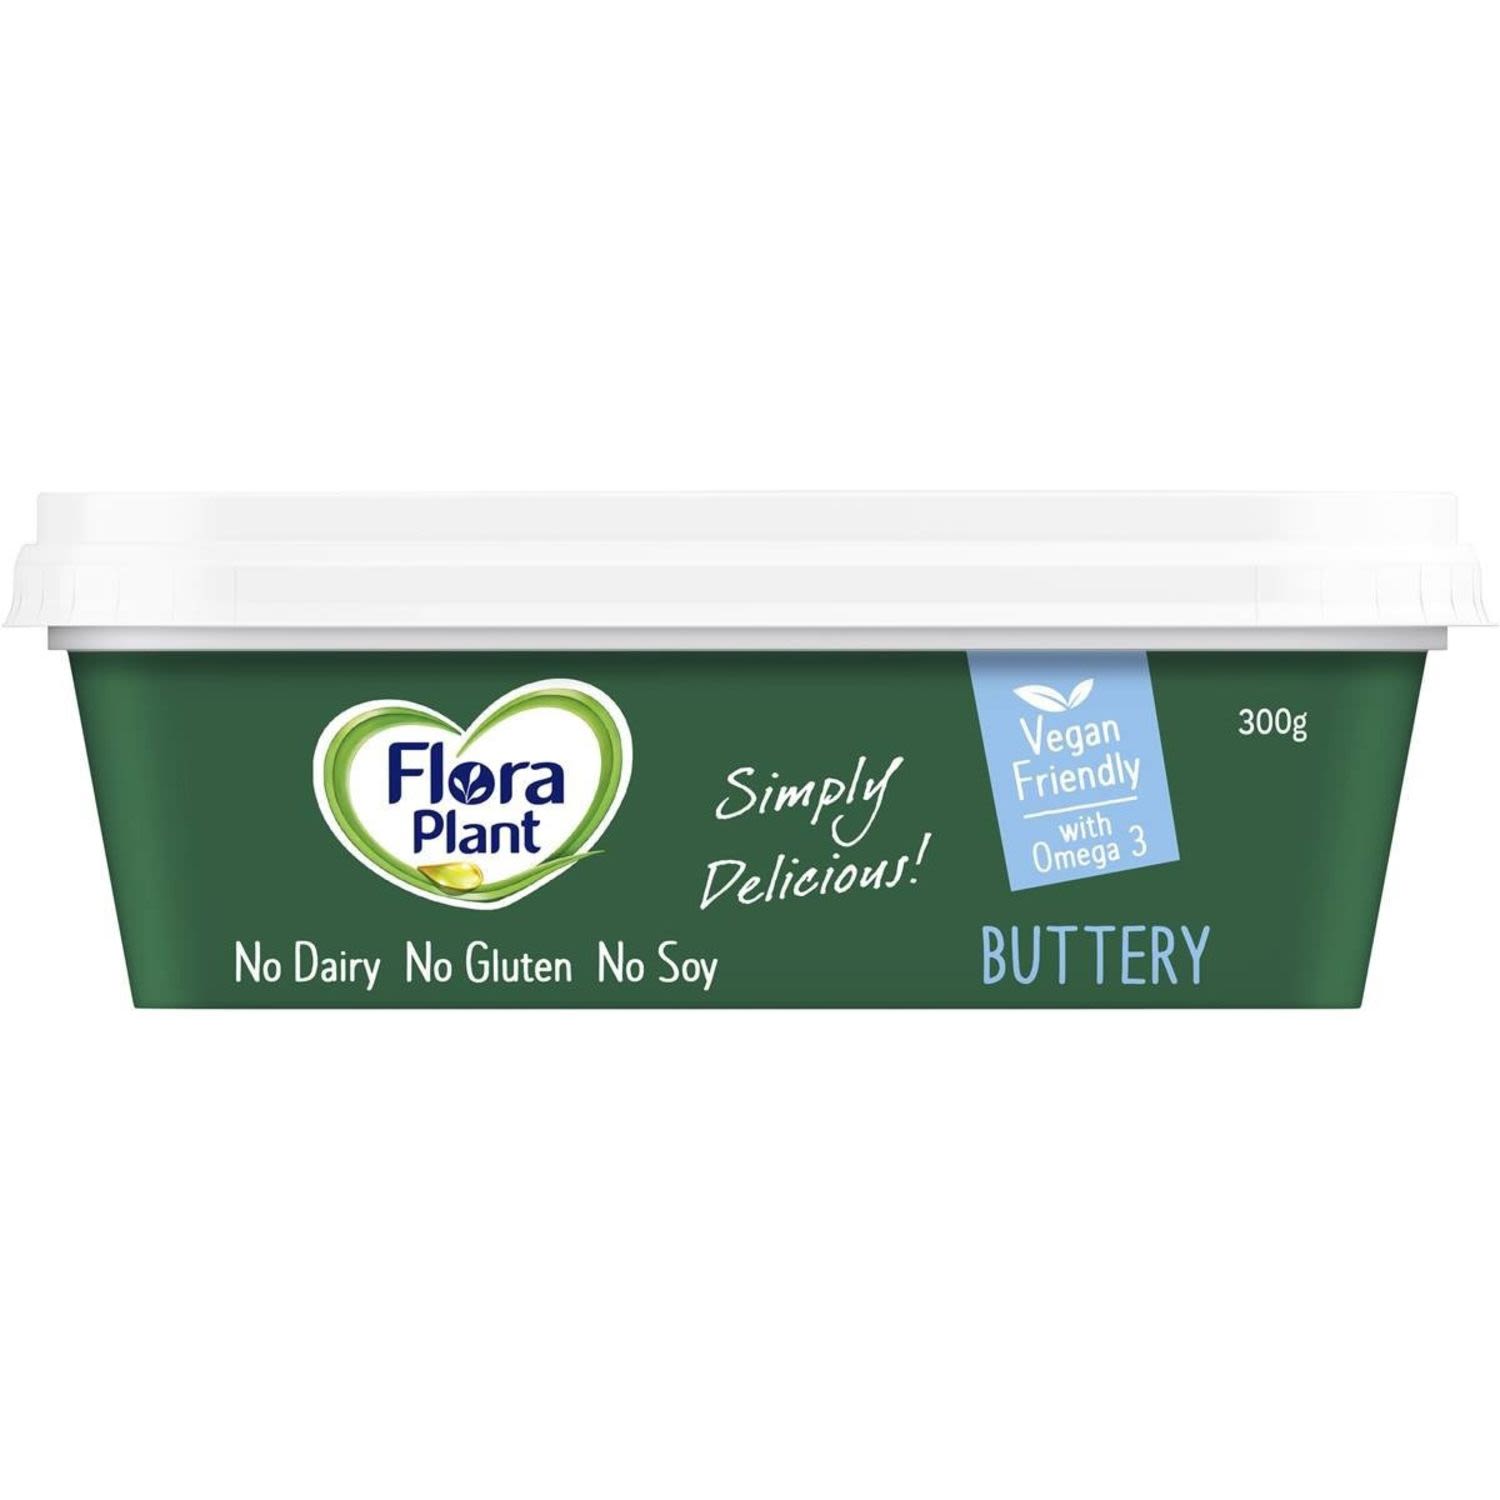 Flora Plant Dairy Free Buttery, 300 Gram